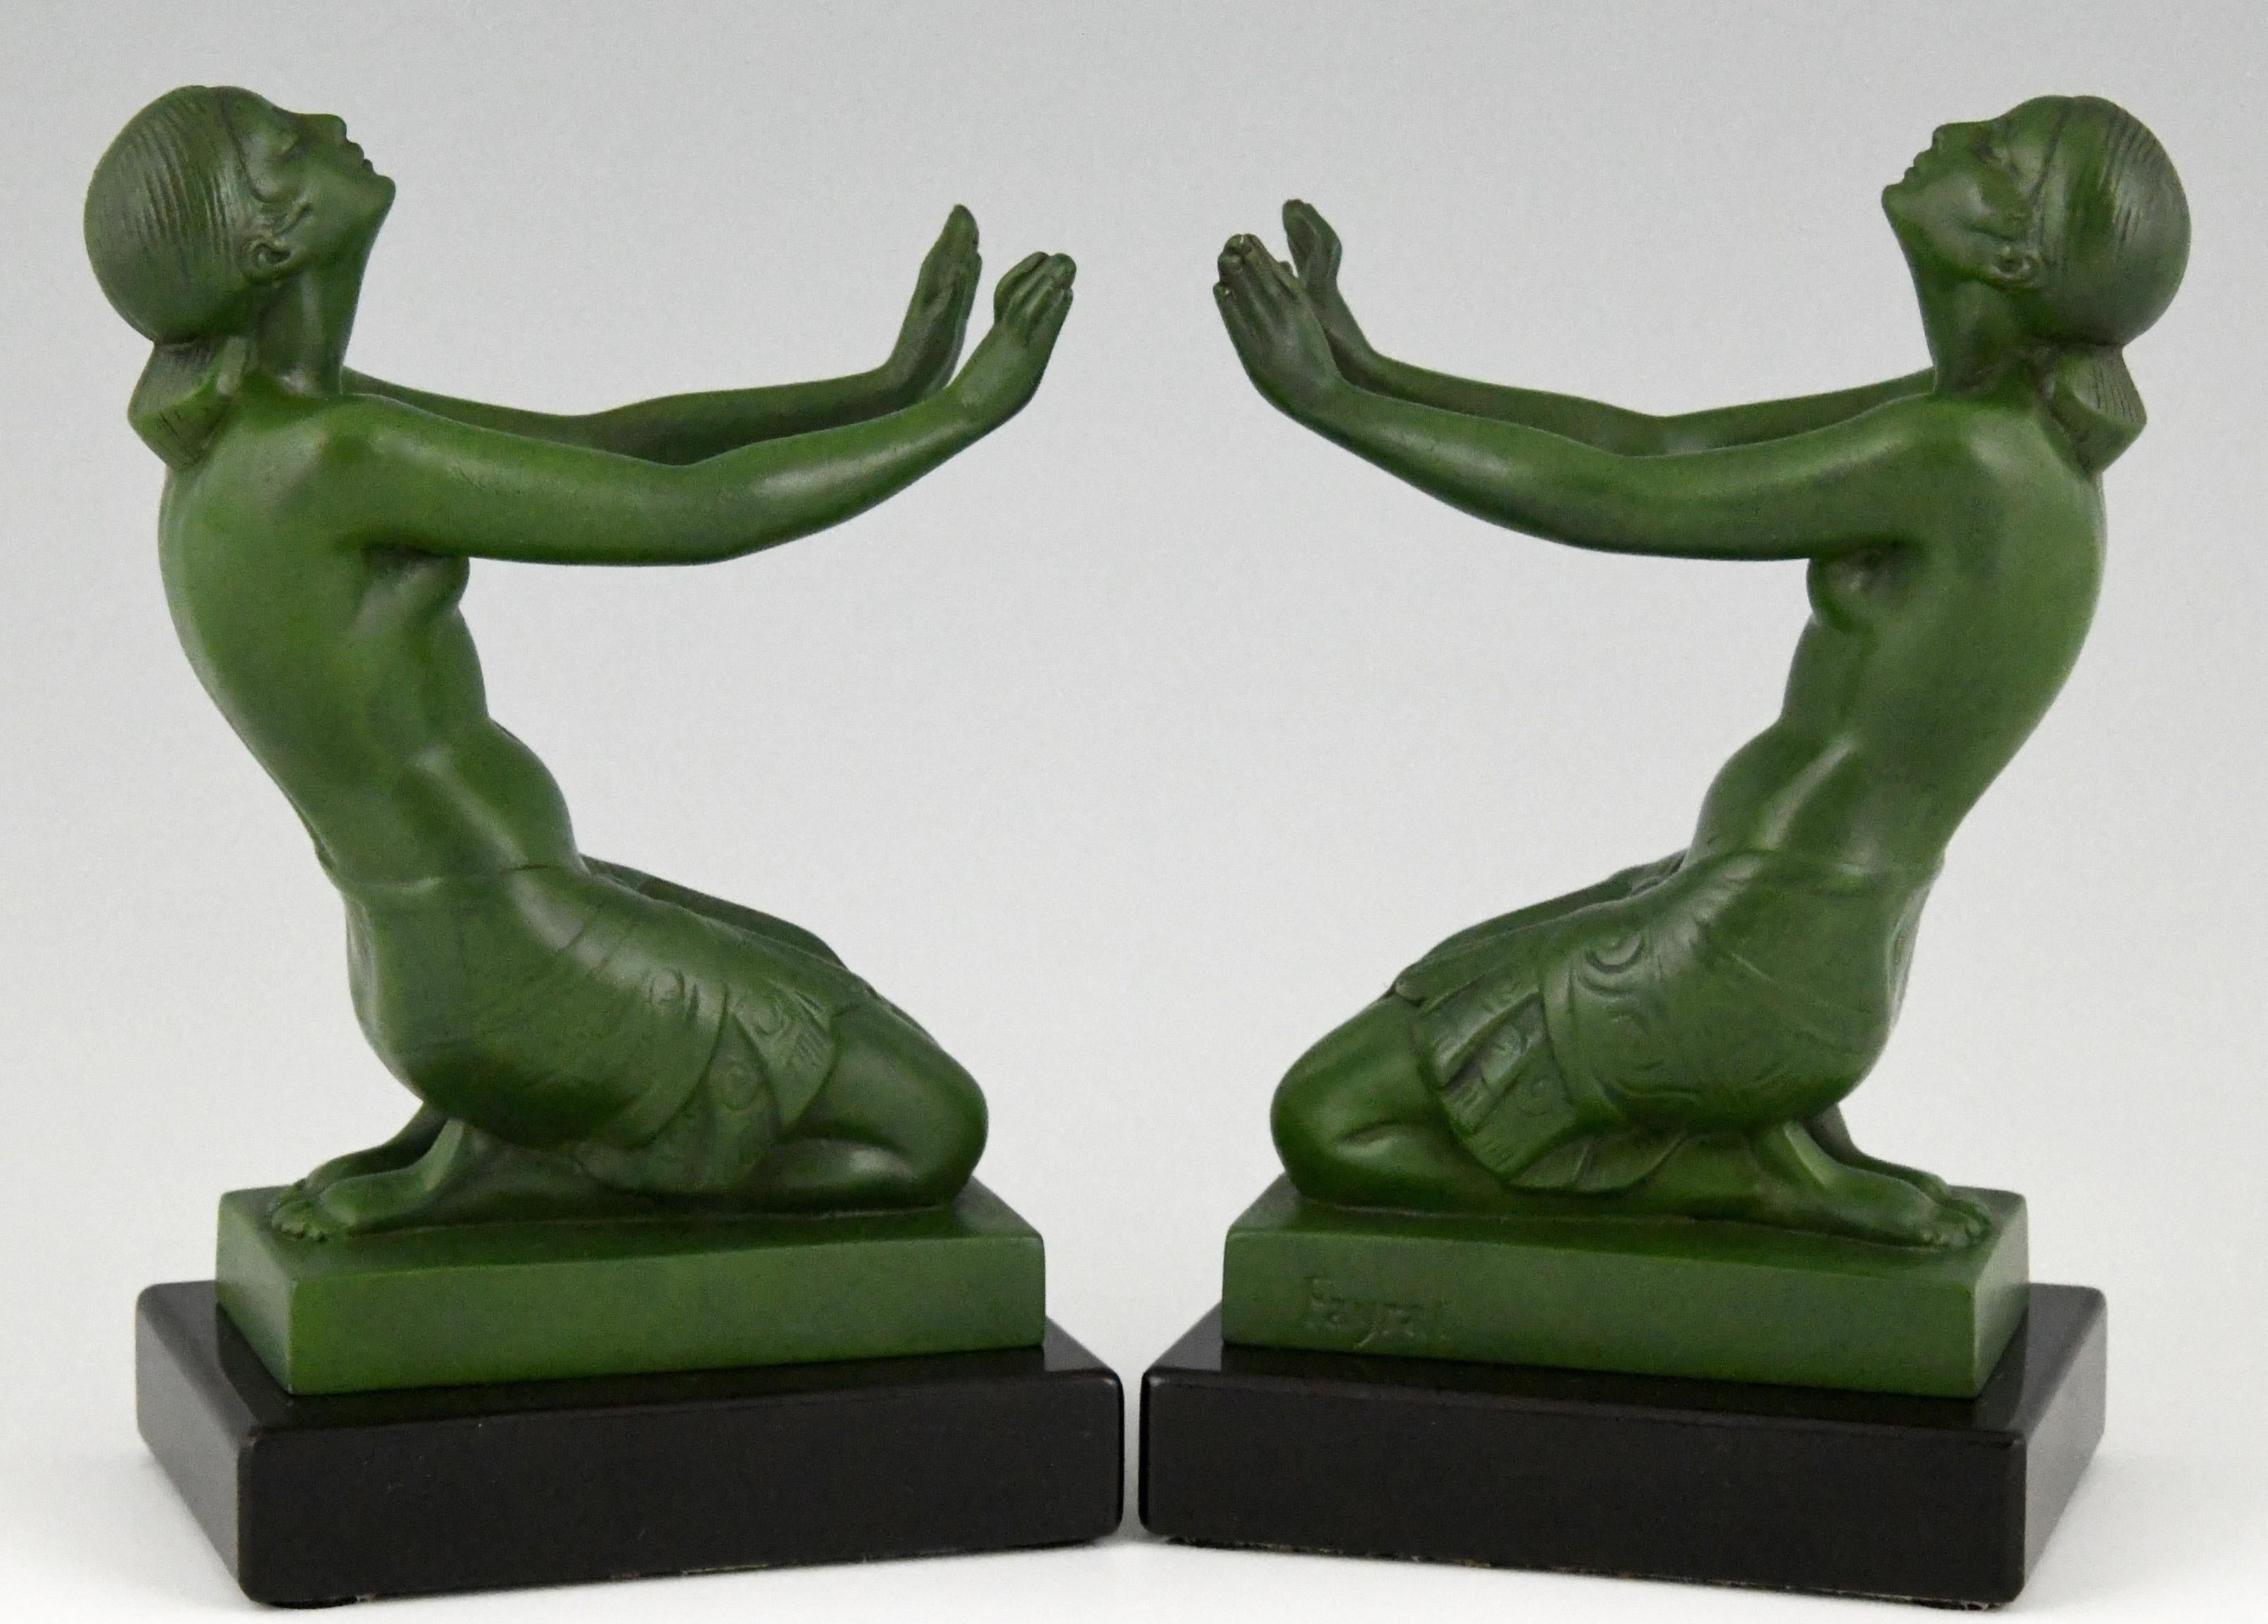 Art Deco figural nude bookends figuring two kneeling women with outstretched arms signed Fayral, this is the pseudonym of Pierre Le Faguays for the models he designed for Max Le Verrier.
France, 1930. Patinated metal on black marble bases.